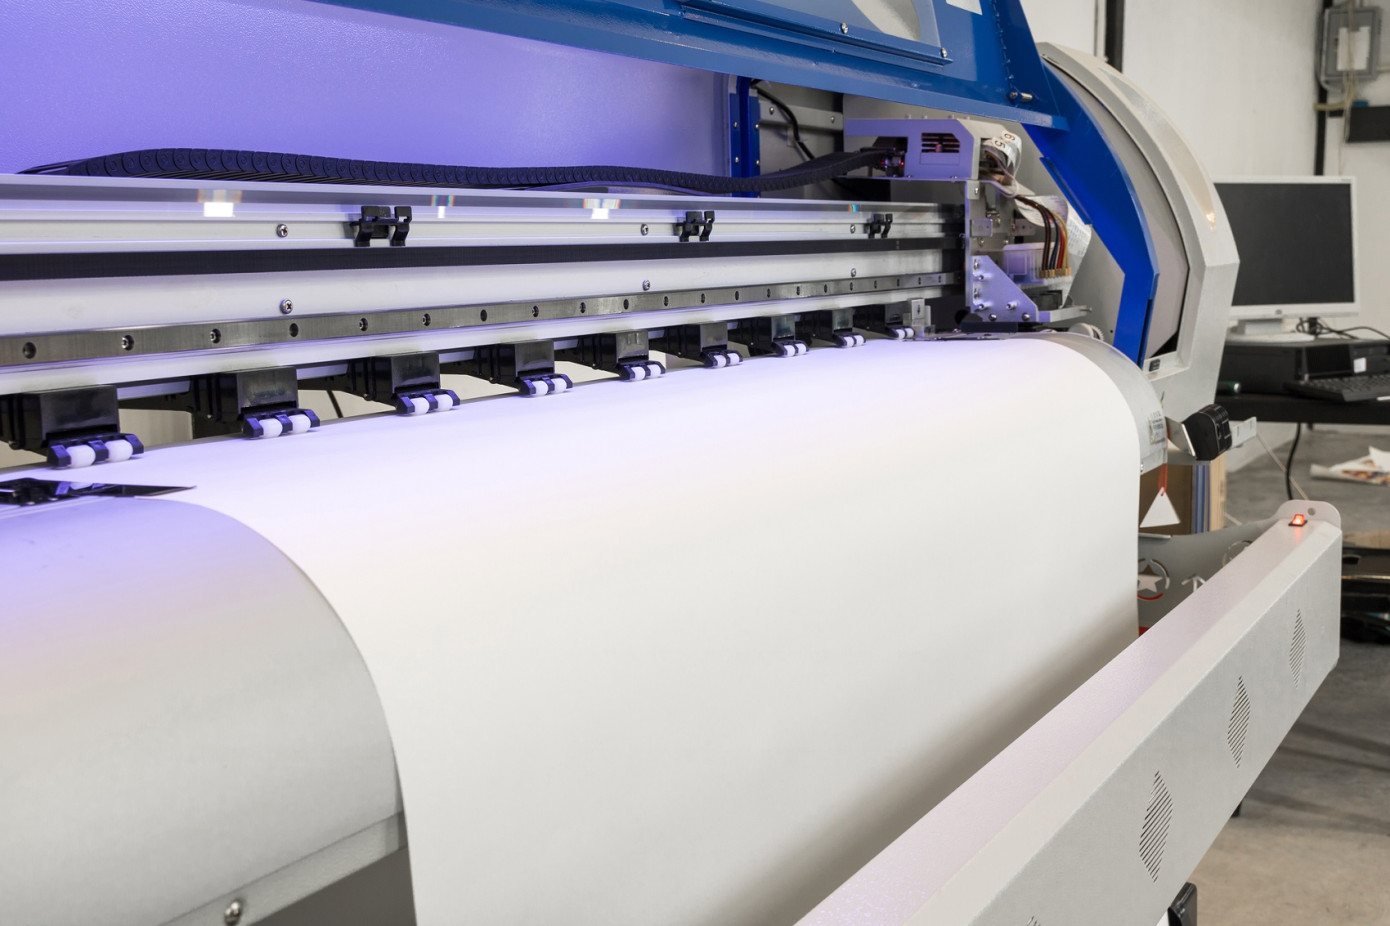 U.S. printing-writing paper shipments increased by 13% in April